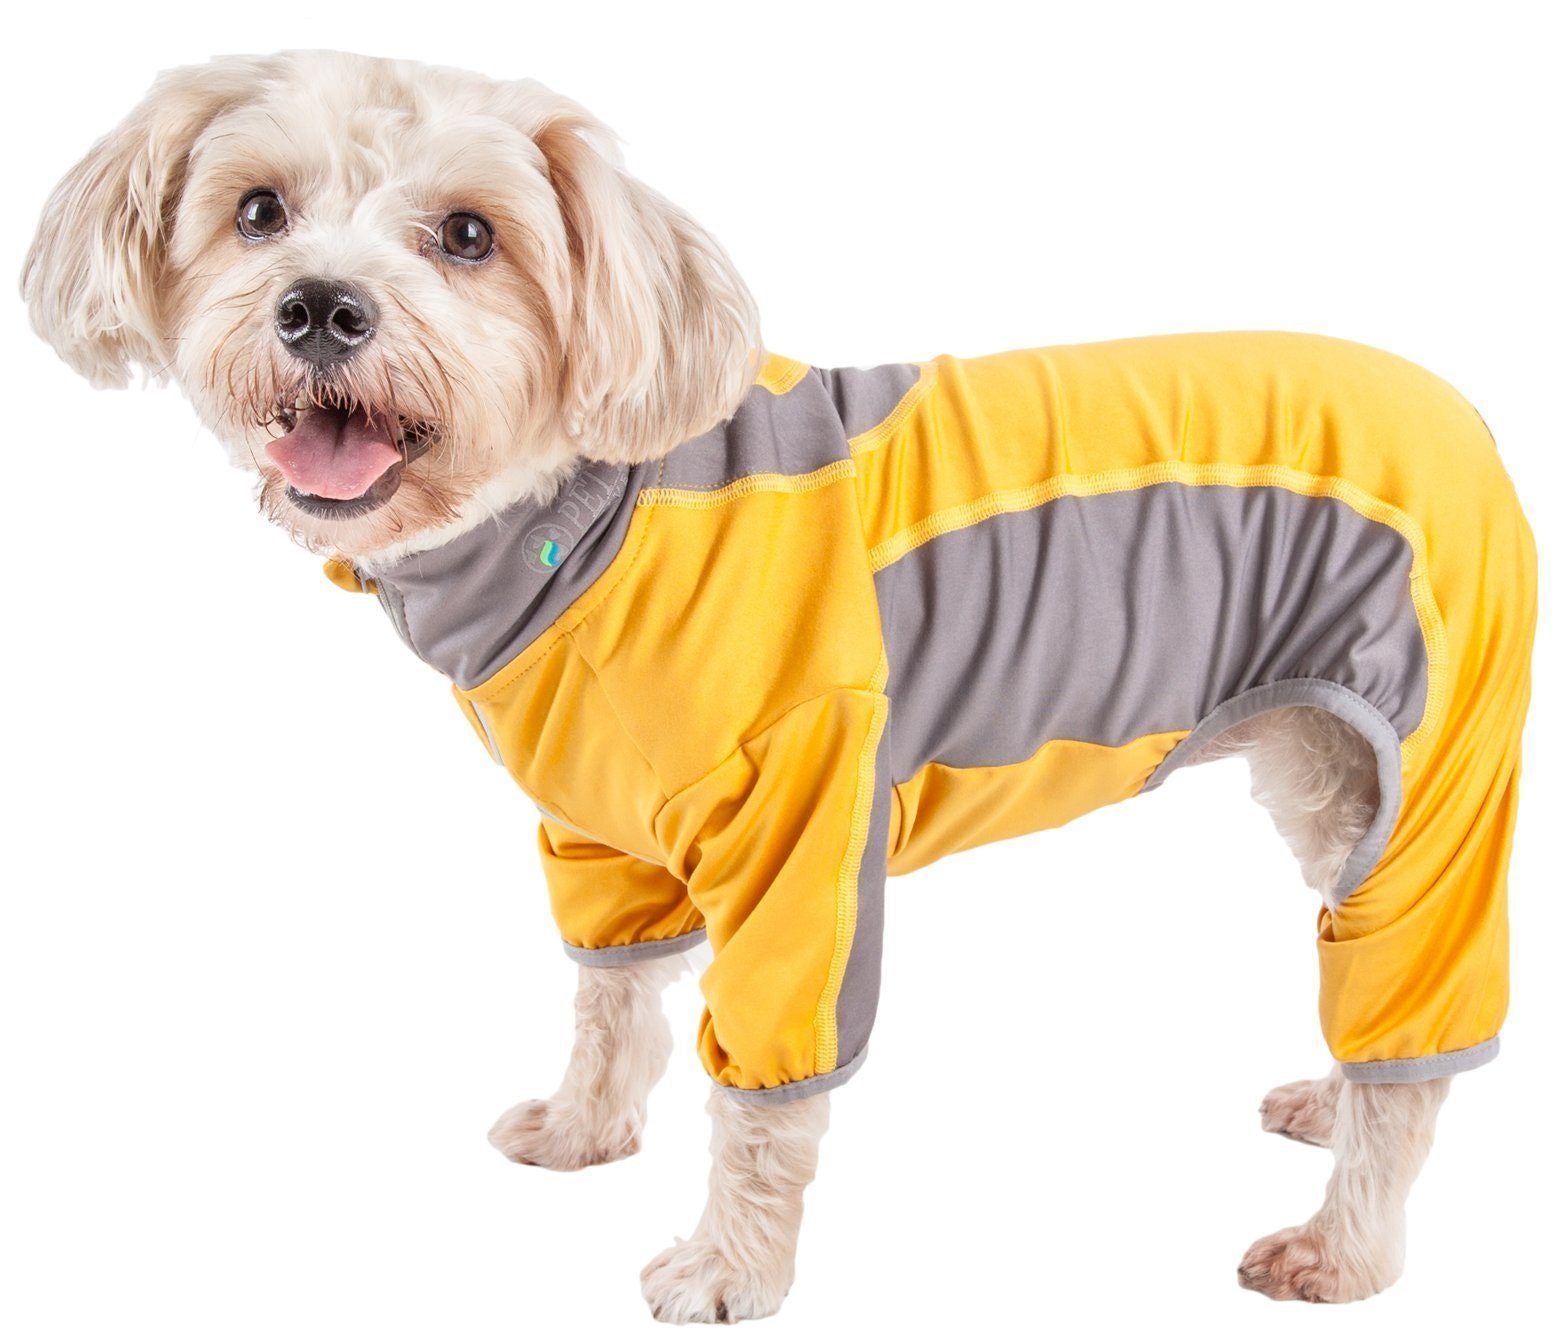 Pet Life ® Active 'Warm-Pup' Stretchy and Quick-Drying Fitness Dog Yoga Warm-Up Tracksuit X-Small Sunkist Yellow Orange and Gray